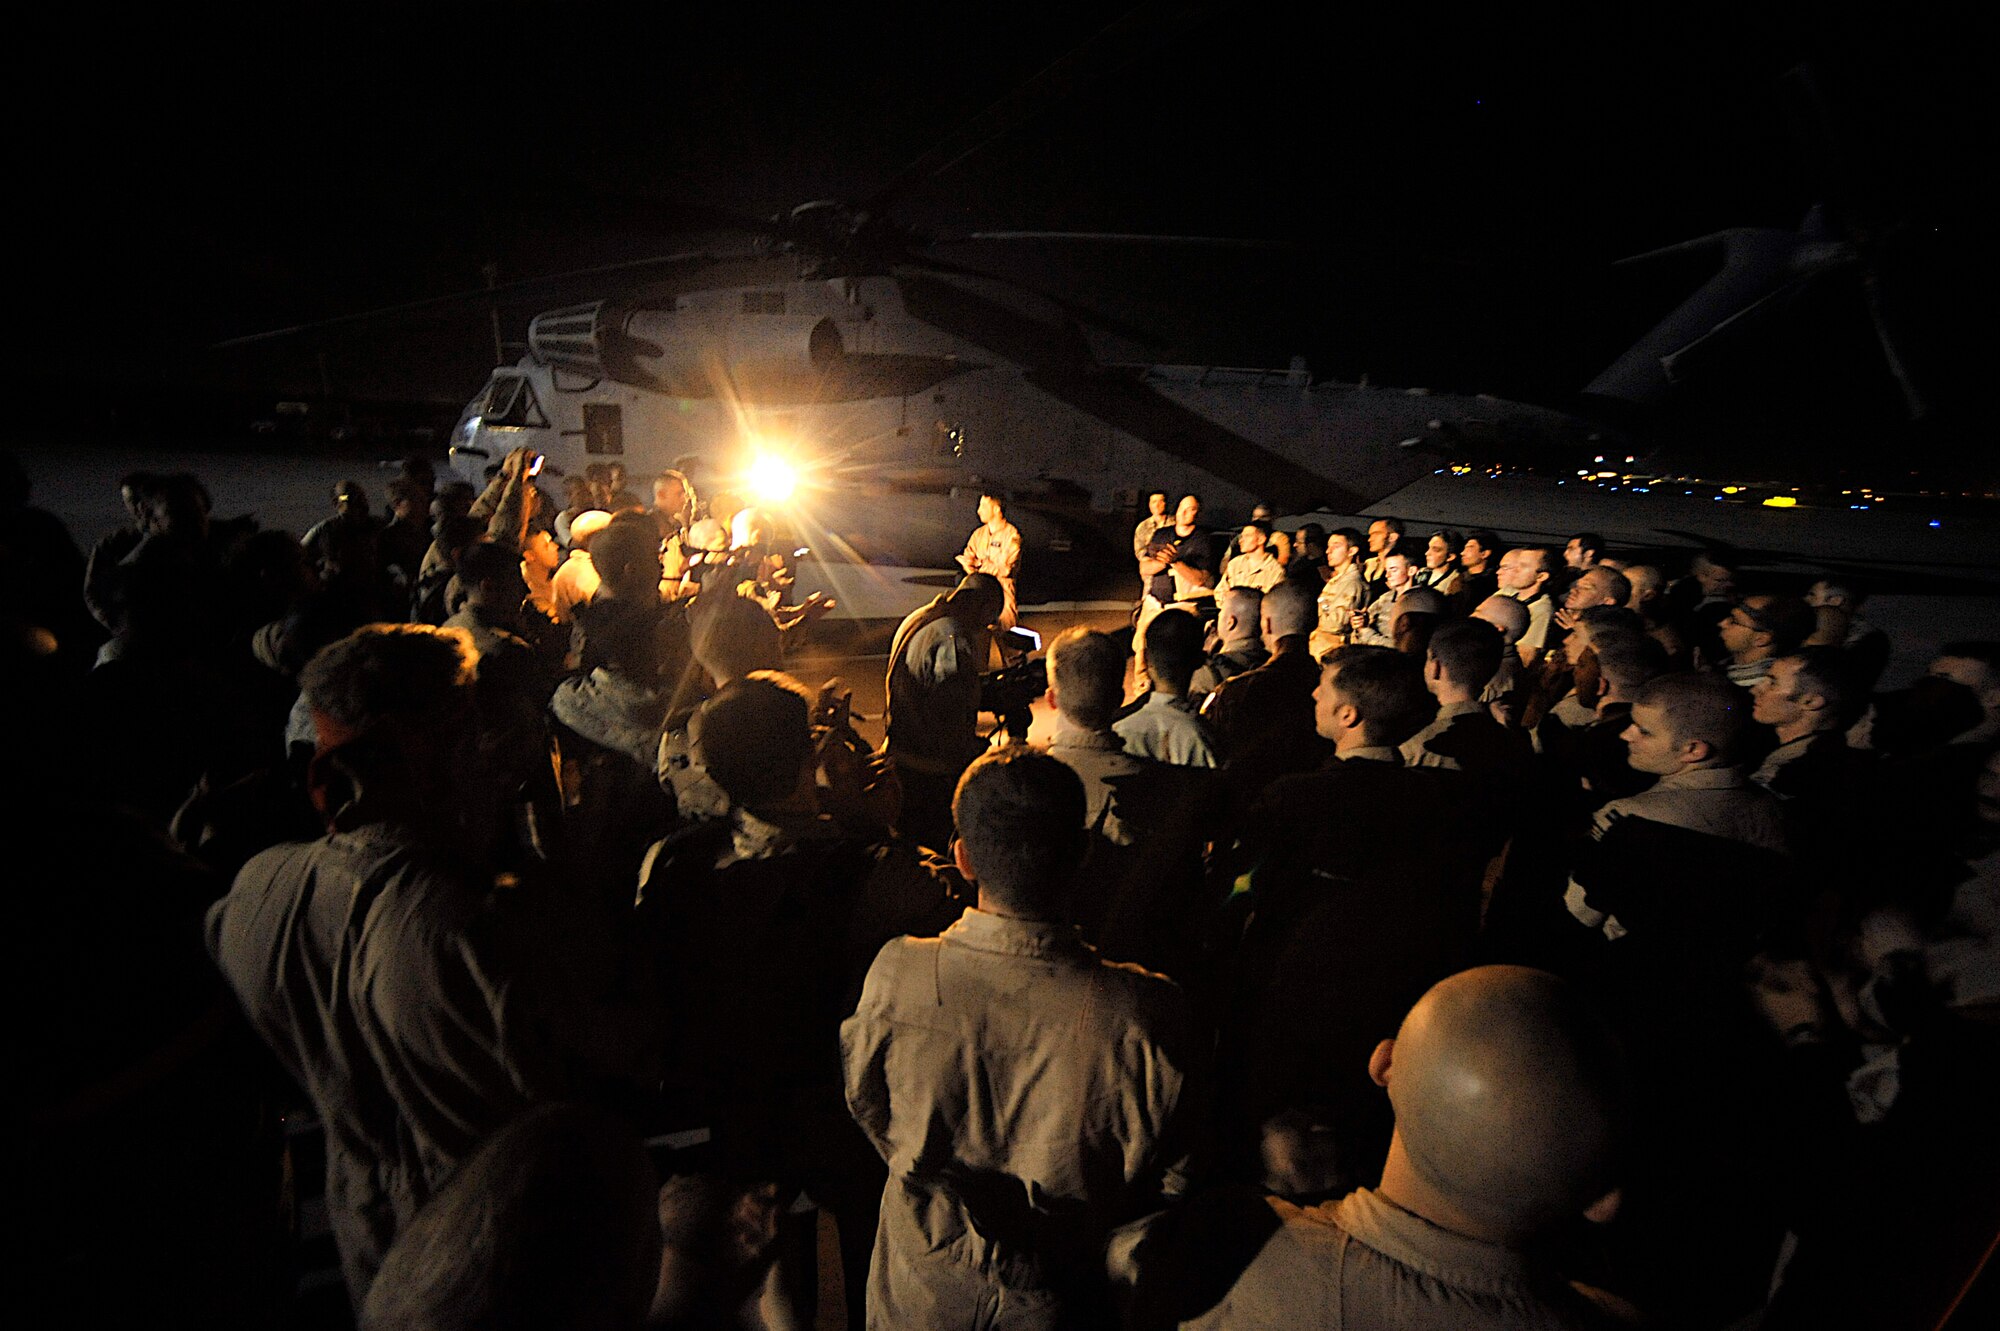 Lt. Col. Gene Becker speaks to the crews and maintainers after the last combat mission of the MH-53 Pave Low Sept. 28 in Iraq. The 20th ESOS MH-53 helicopters and their crews provided much of the vertical lift, direct action and logistical resupply to the Combined Joint Special Operations Task Force in Iraq. Colonel Becker is the 20th Expeditionary Special Operations Squadron commander. (U.S. Air Force photo/Staff Sgt. Aaron Allmon) 
